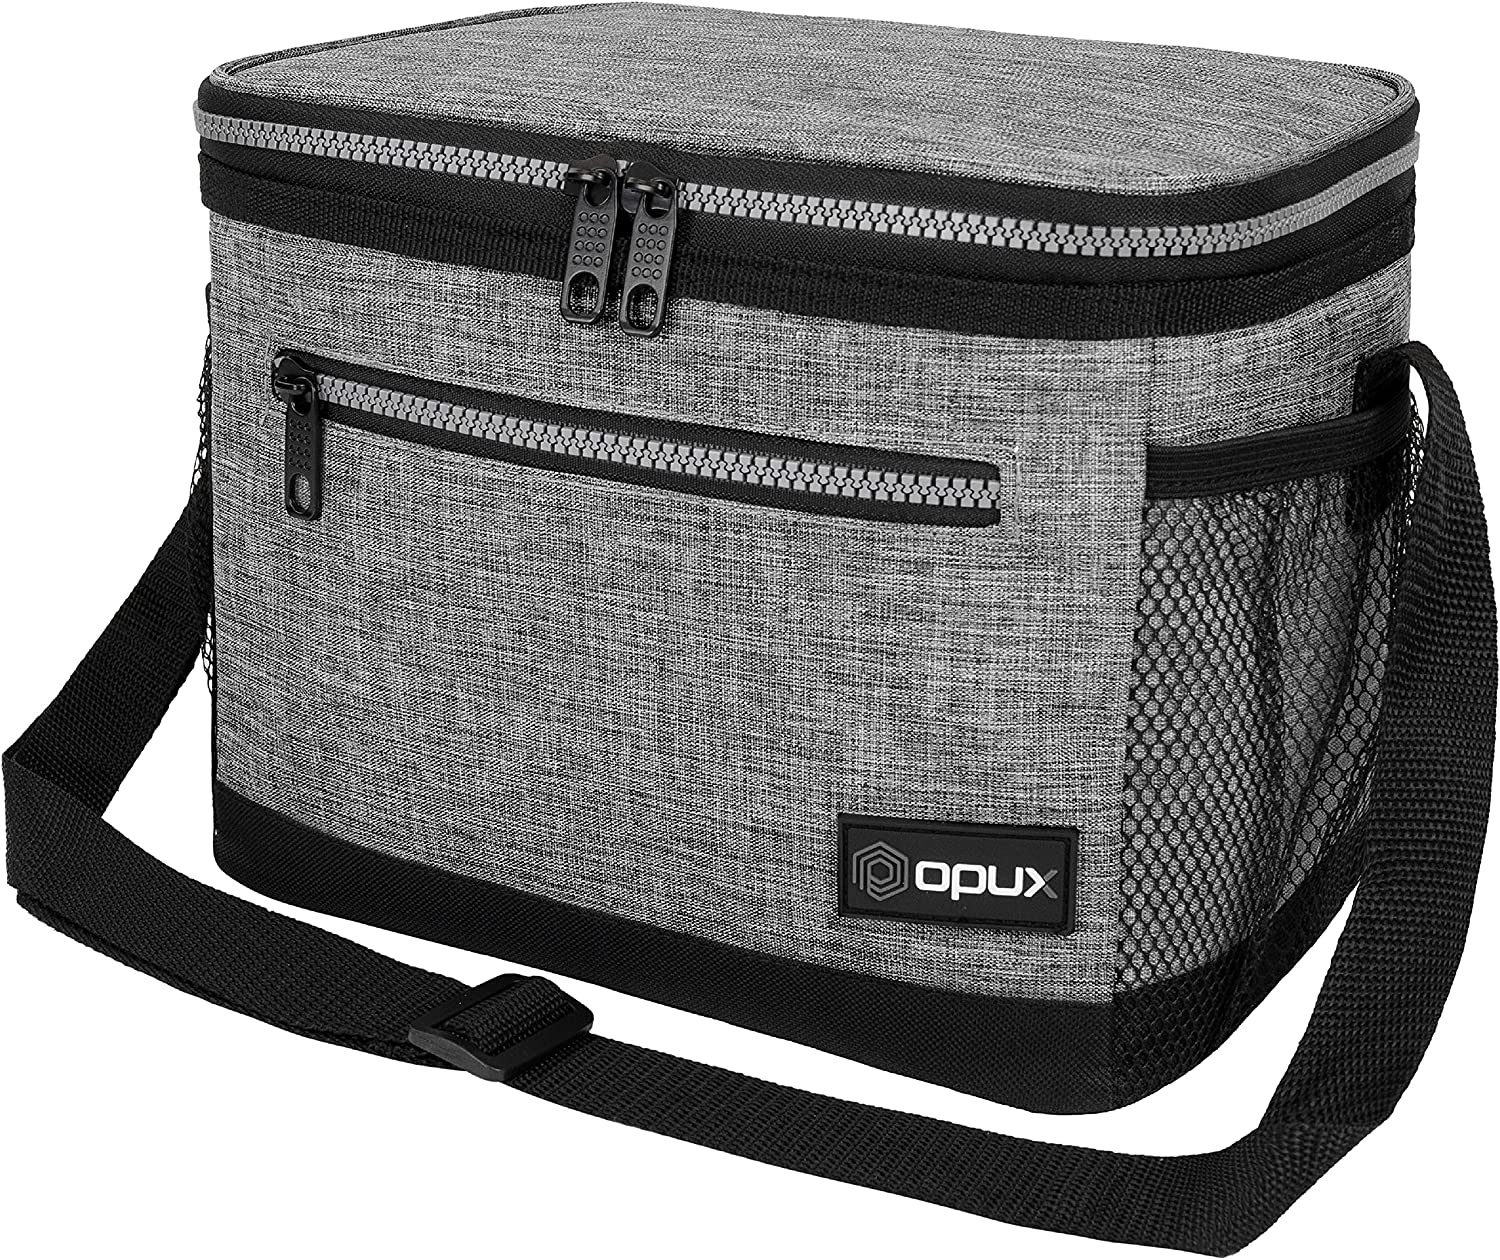 https://www.wideopencountry.com/wp-content/uploads/sites/4/eats/2021/08/OPUX-Insulated-Lunch-Box-for-Men-Women-Leakproof-Thermal-Lunch-Bag-for-Work-Reusable-Lunch-Cooler-Tote-Soft-School-Lunch-Pail-for-Kids-with-Shoulder-Strap-Pockets-14-Cans-8L-Heather-Grey-.jpg?resize=1500%2C1260